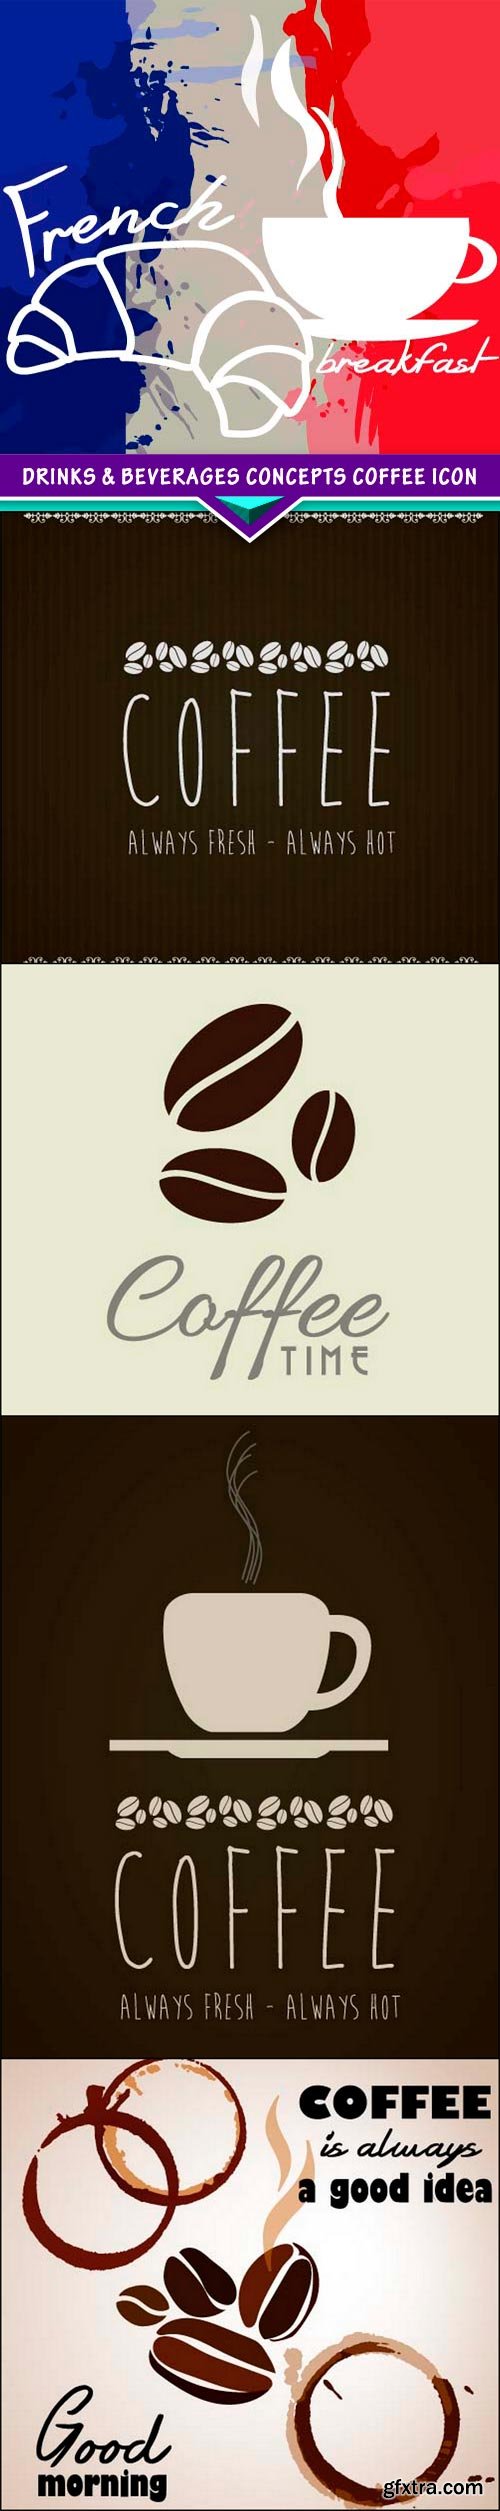 Drinks & beverages concepts Coffee icon 5x EPS